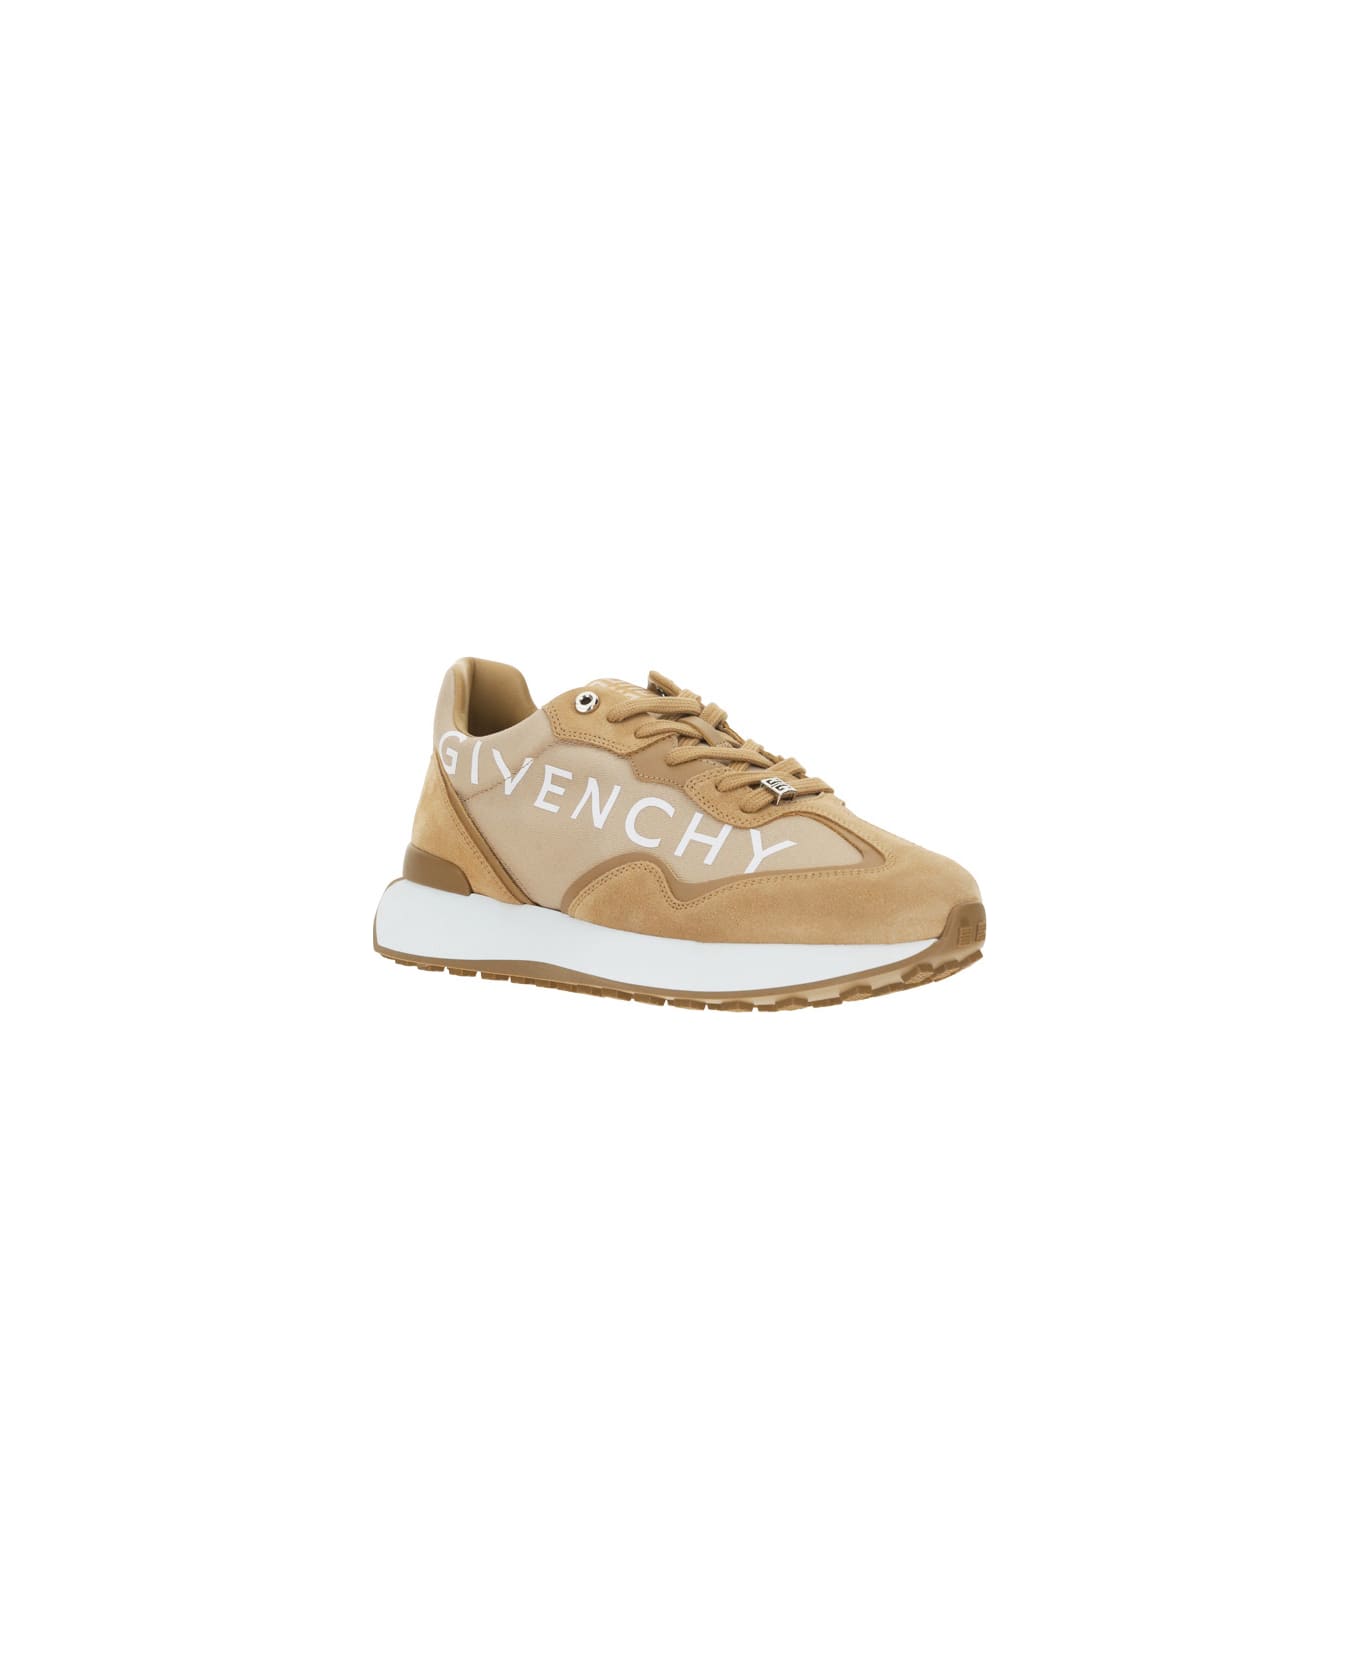 Givenchy Giv Runner Sneakers - Beige Camel